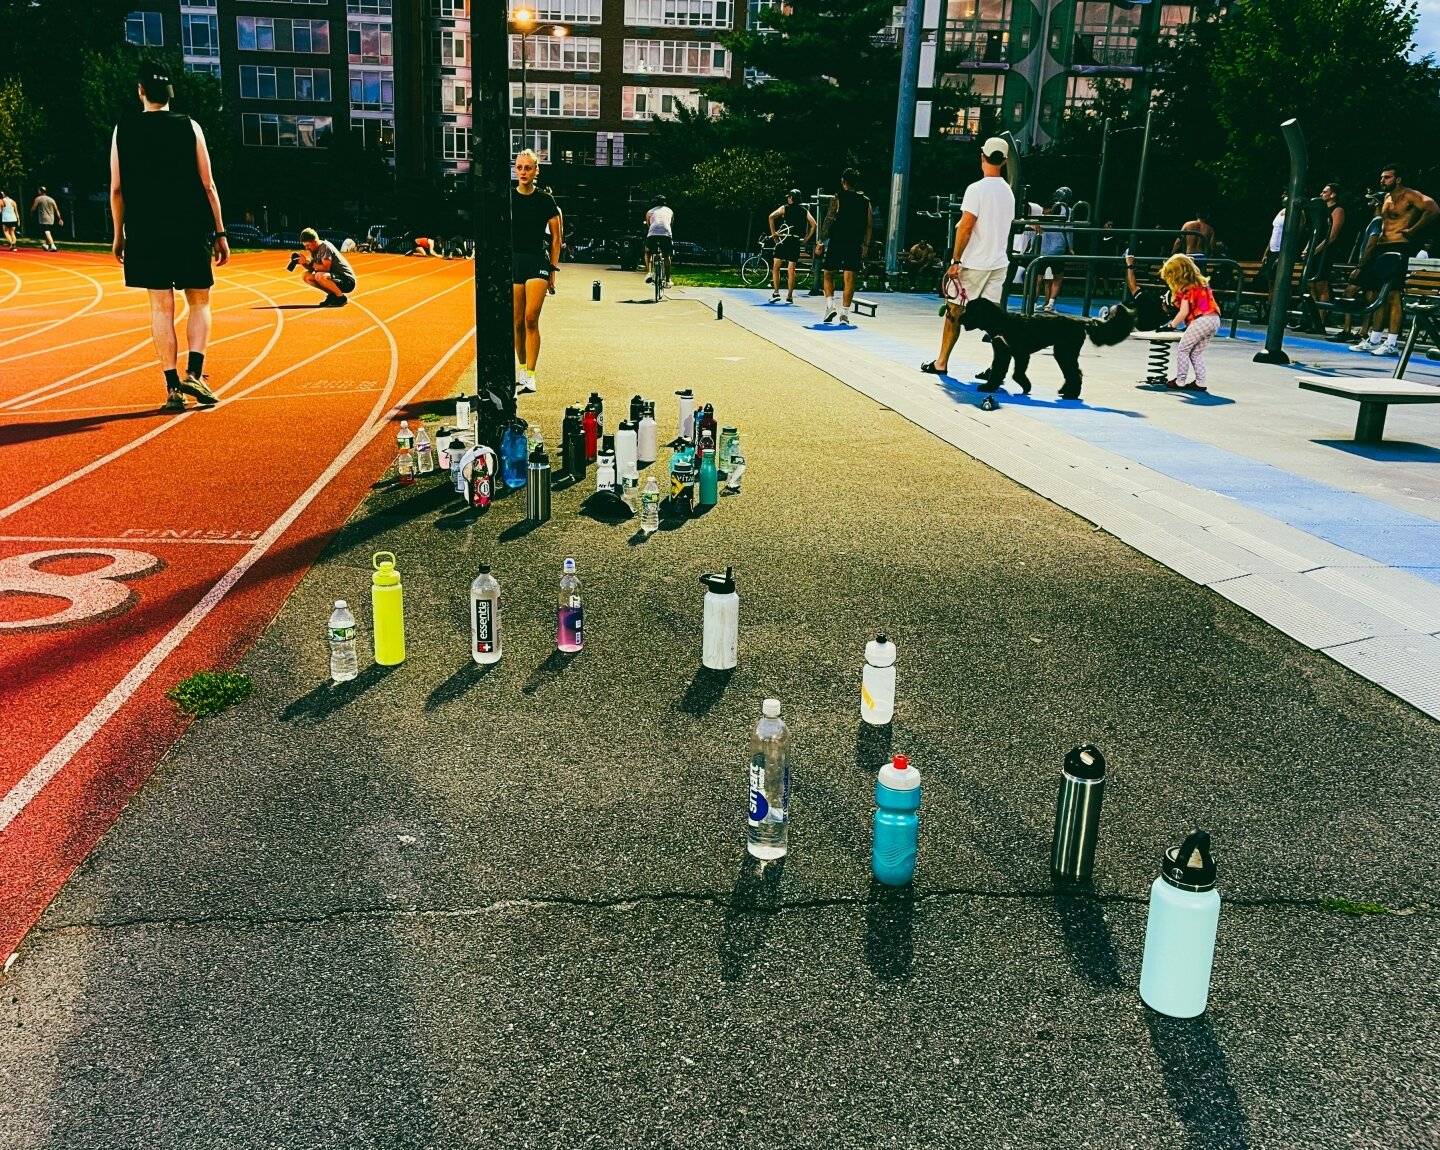 From &quot;My Walks&quot; Series: Thirst

#runners #mccarrenpark #waterbottles #summerevenings #brooklyn #williamsburg #greenpoint #runningtracks